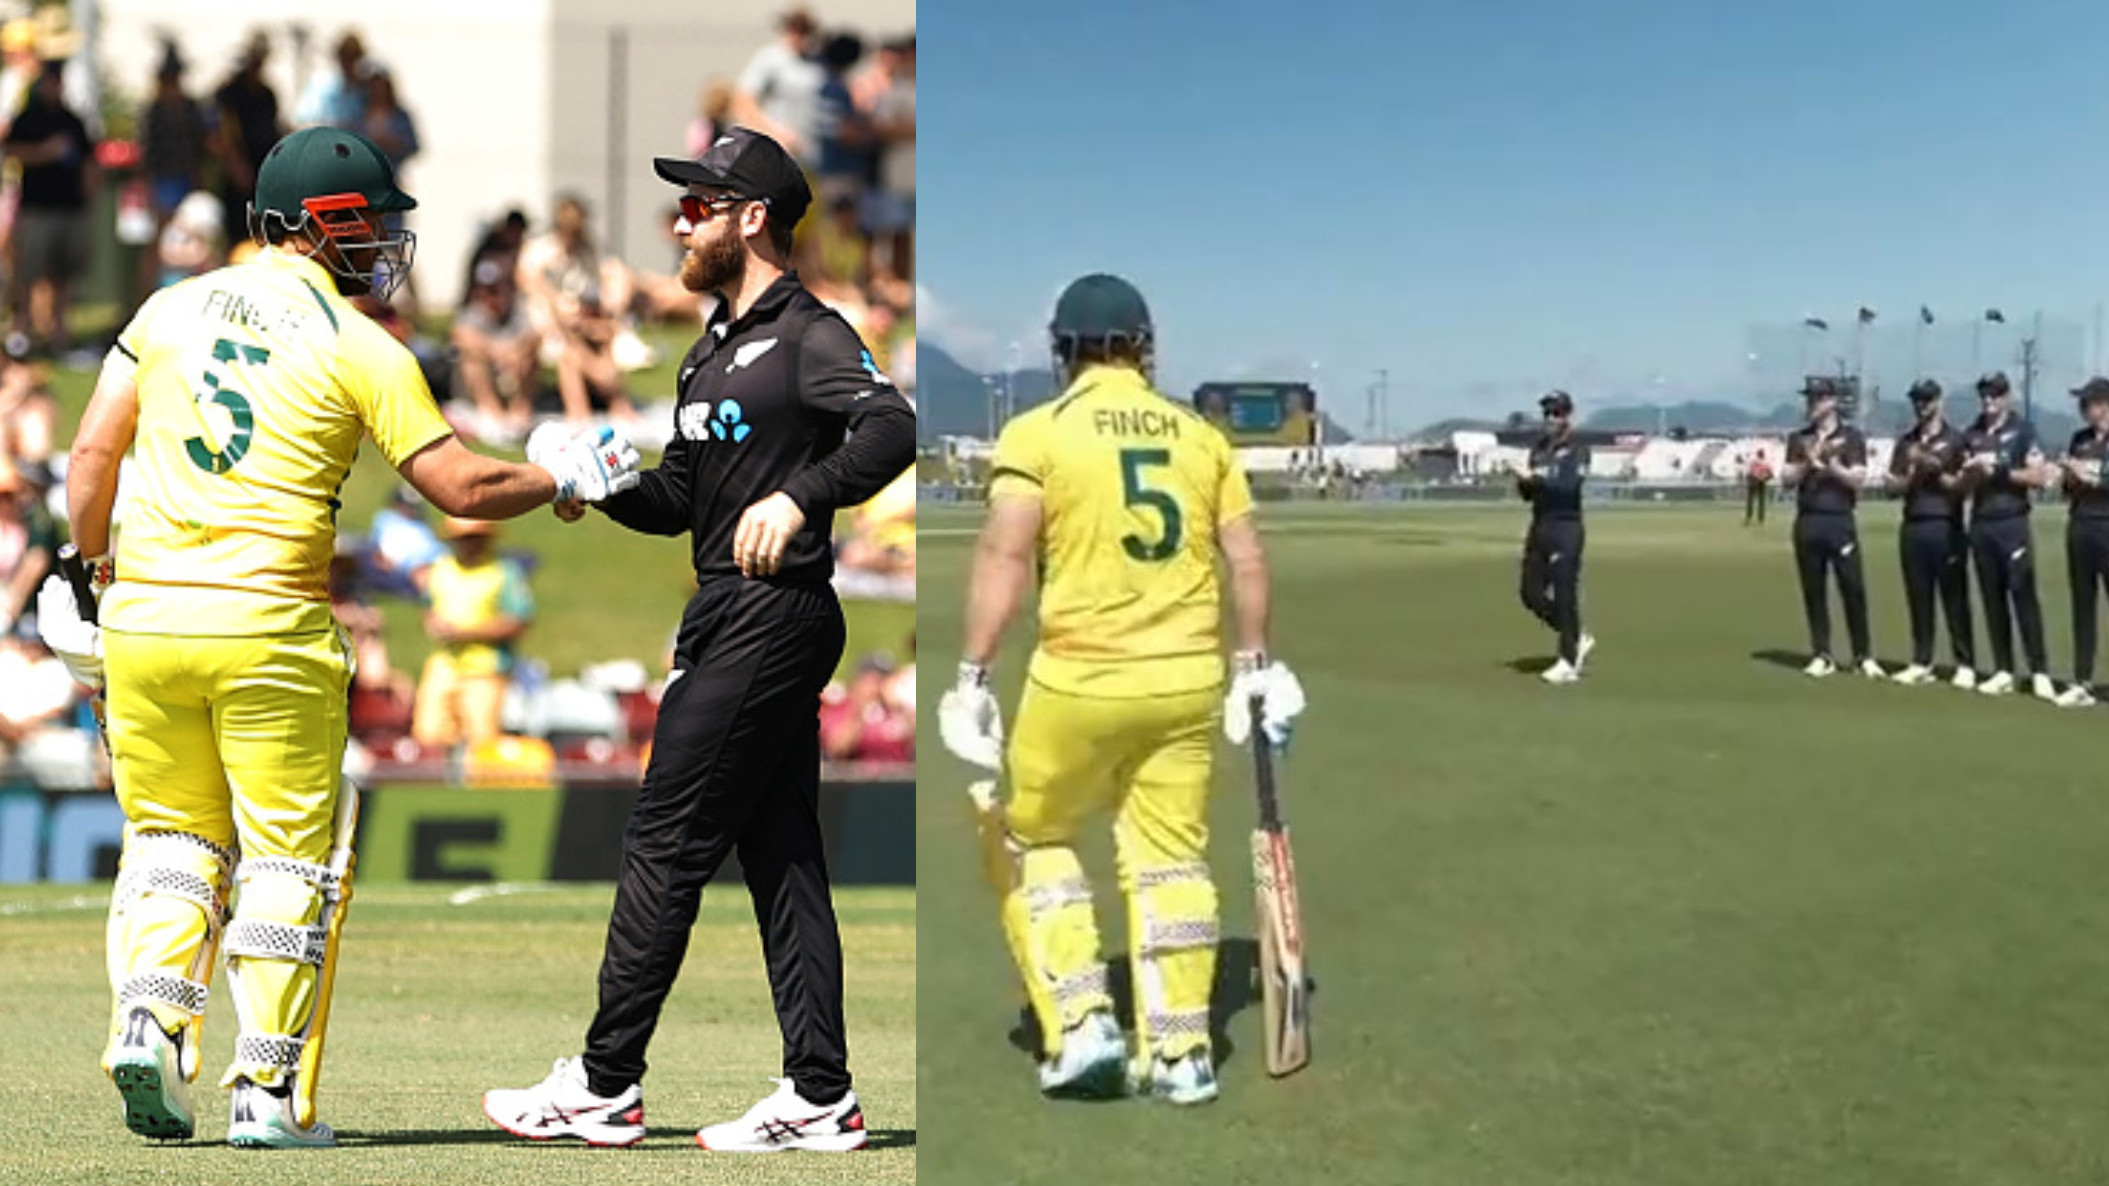 AUS v NZ 2022: WATCH- Kane Williamson’s New Zealand gives guard of honor to Aaron Finch in his final ODI